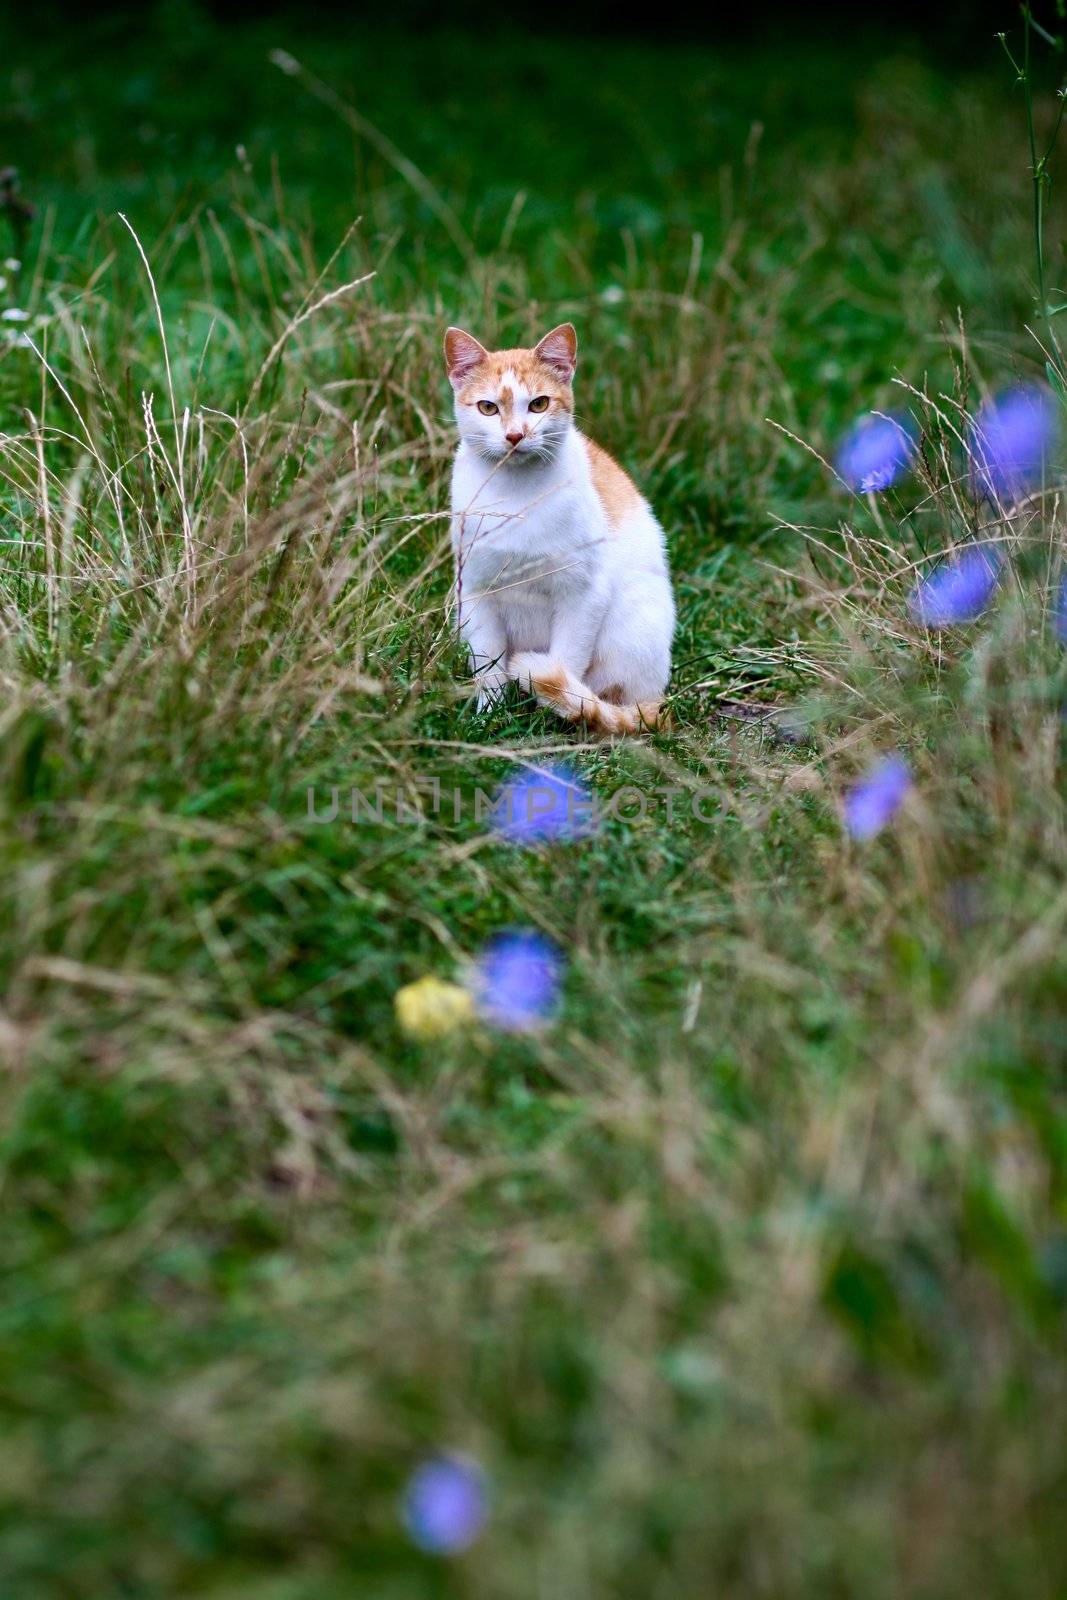 An image of a cat in green grass